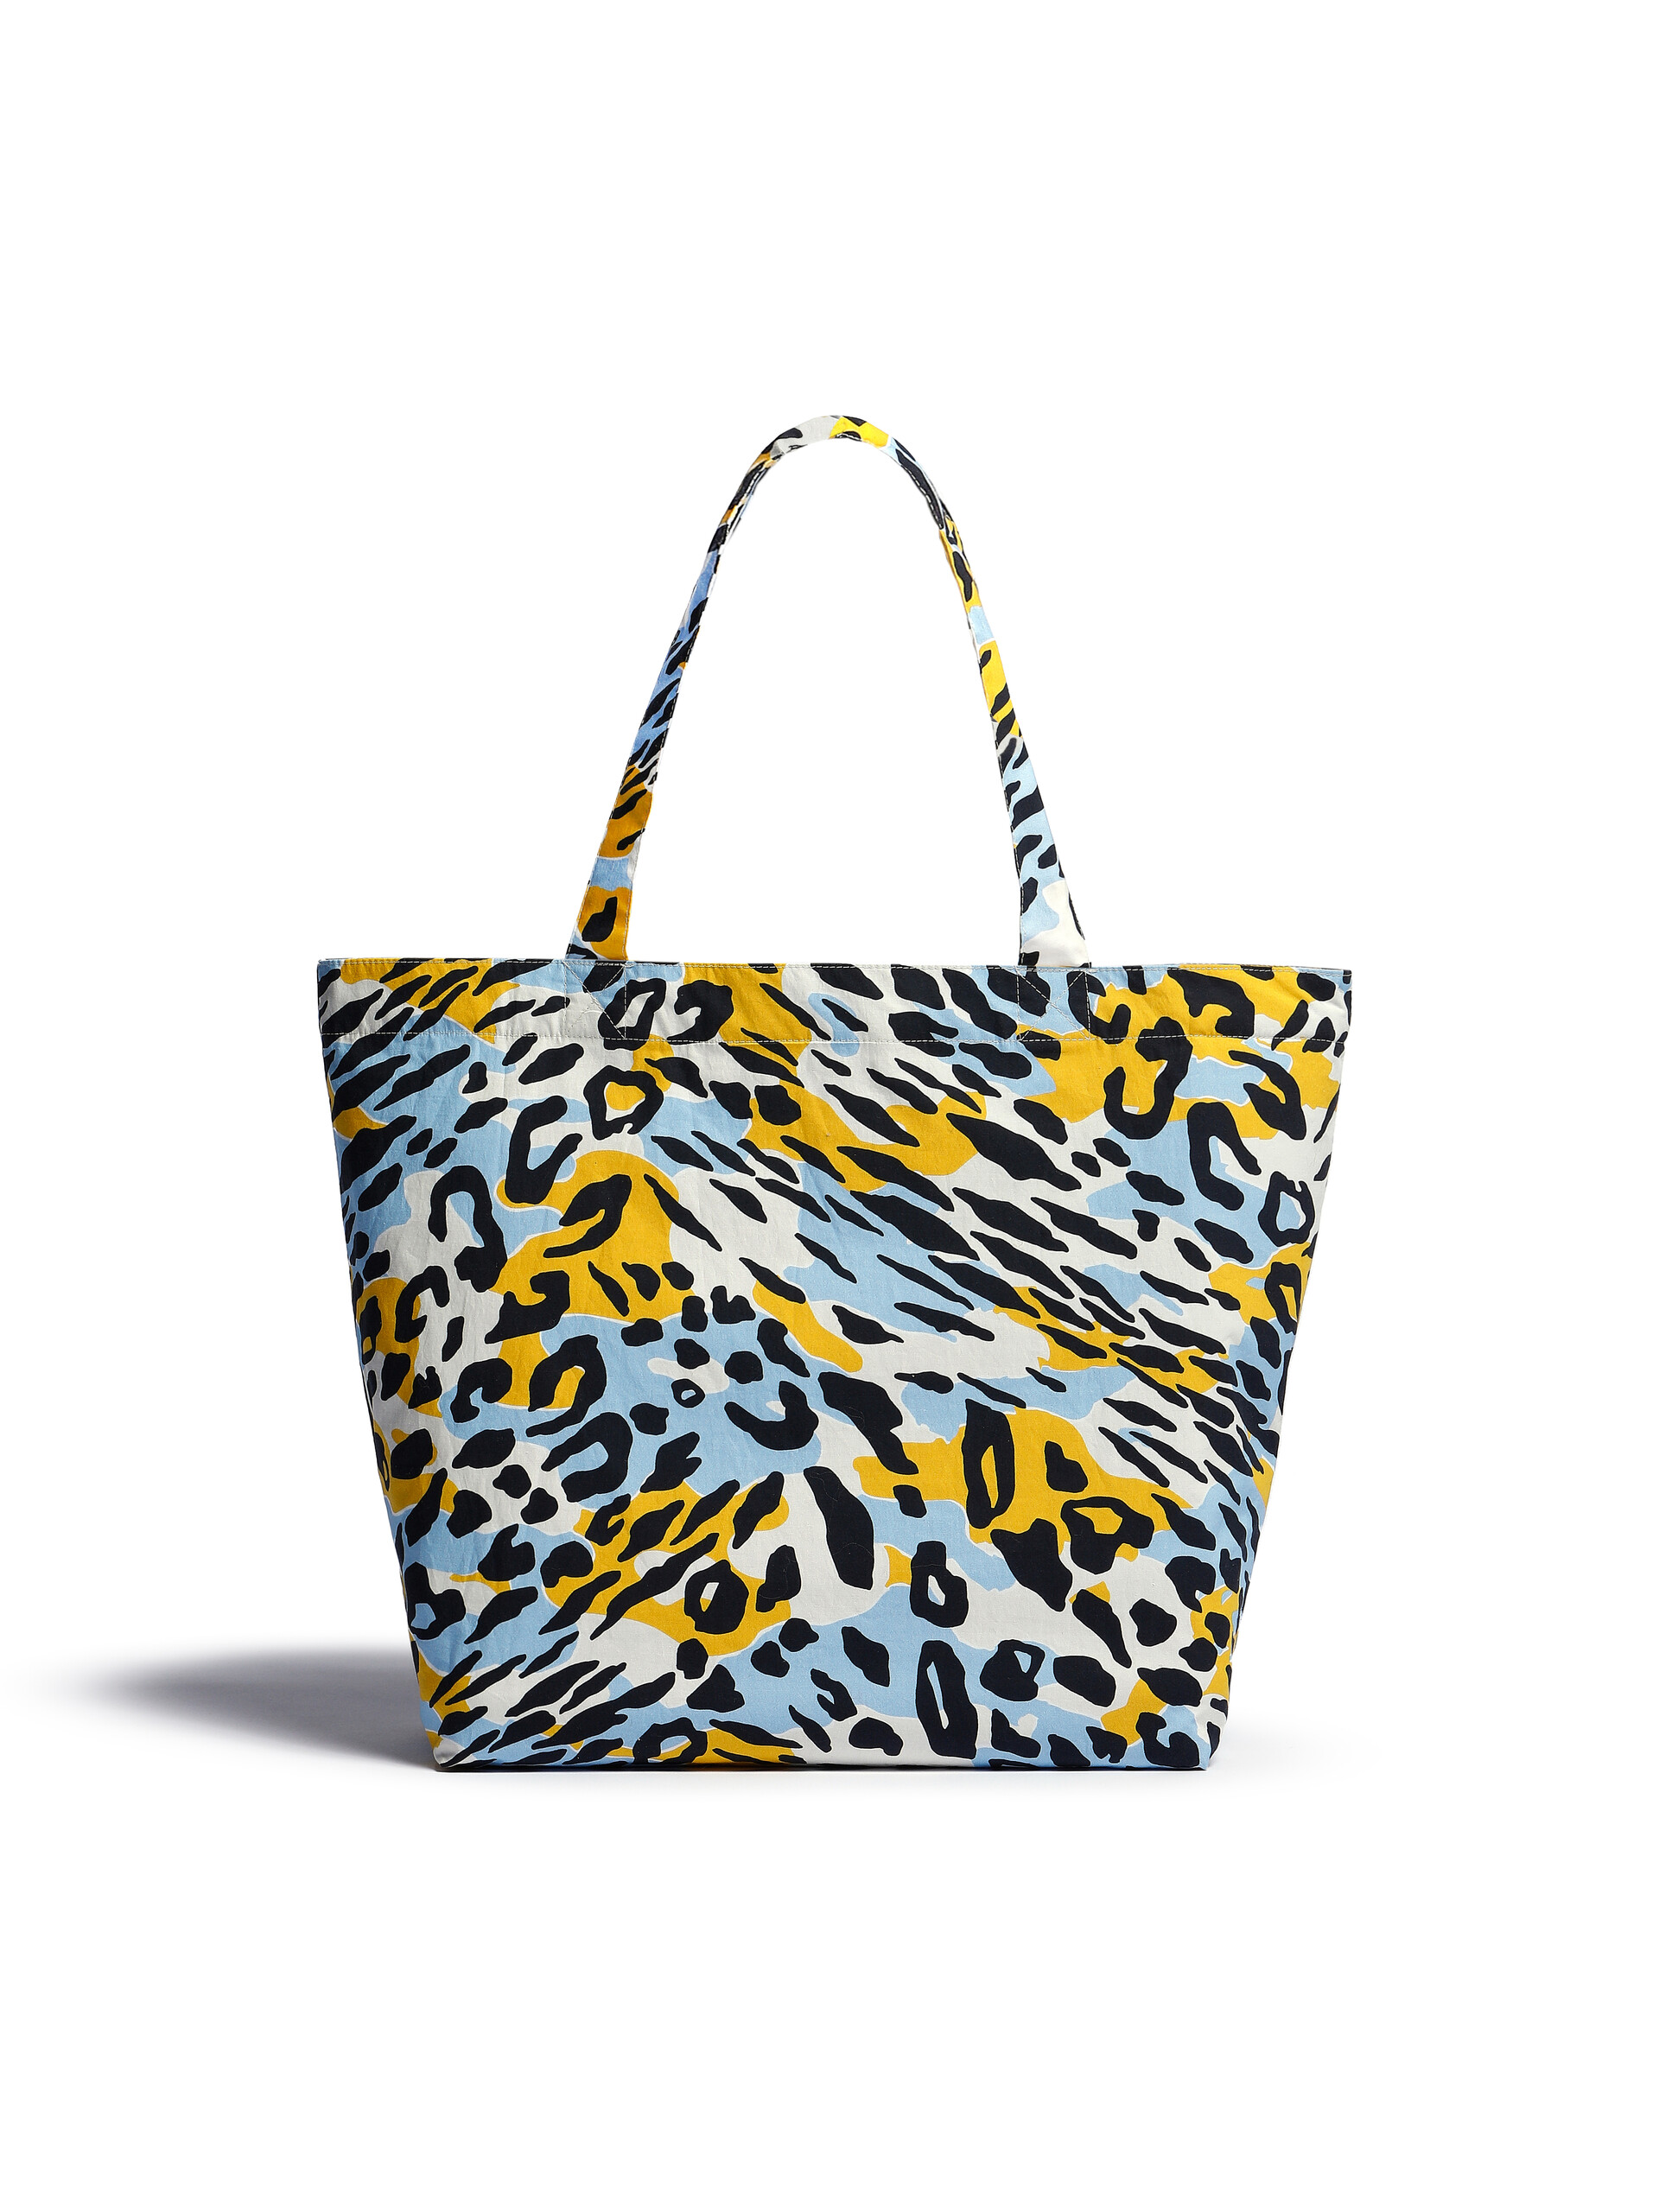 Cotton tote bag with archival black spotted print - Bags - Image 3